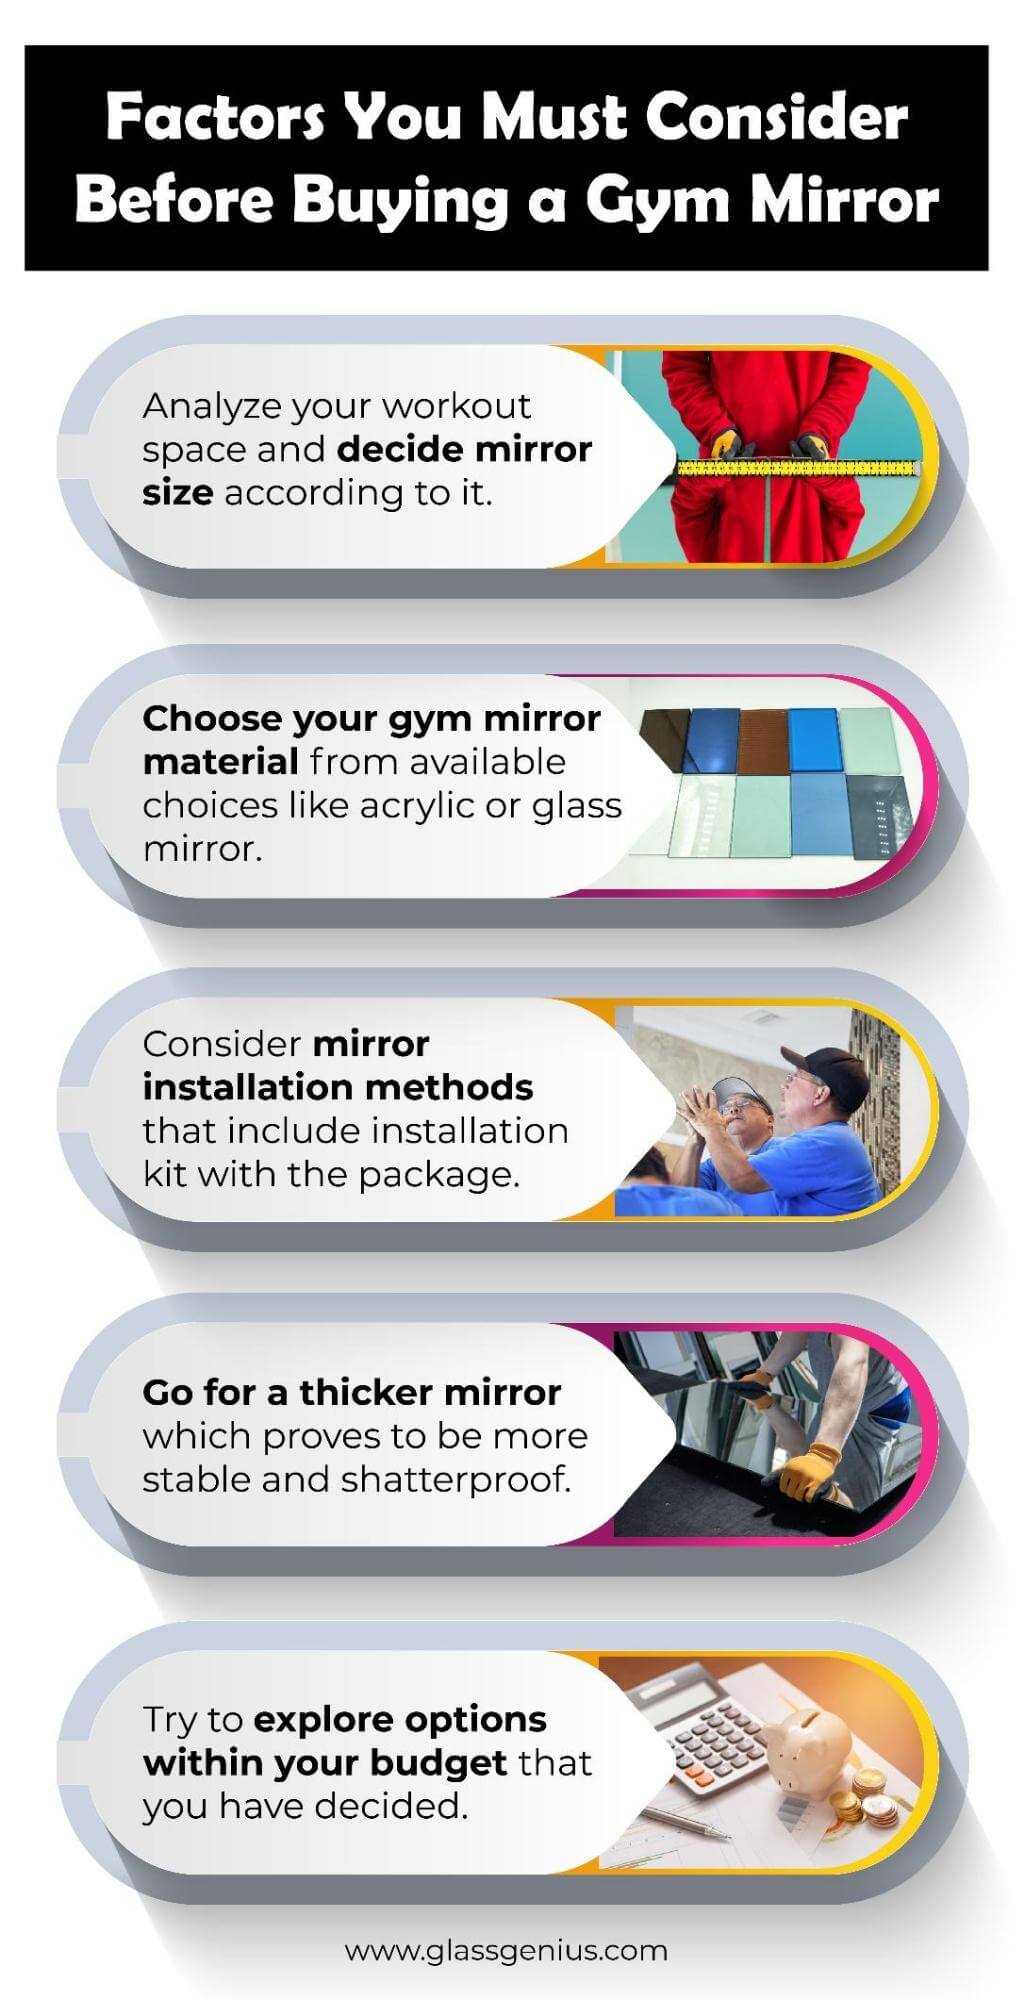 Factors you must consider before buying a gym mirror